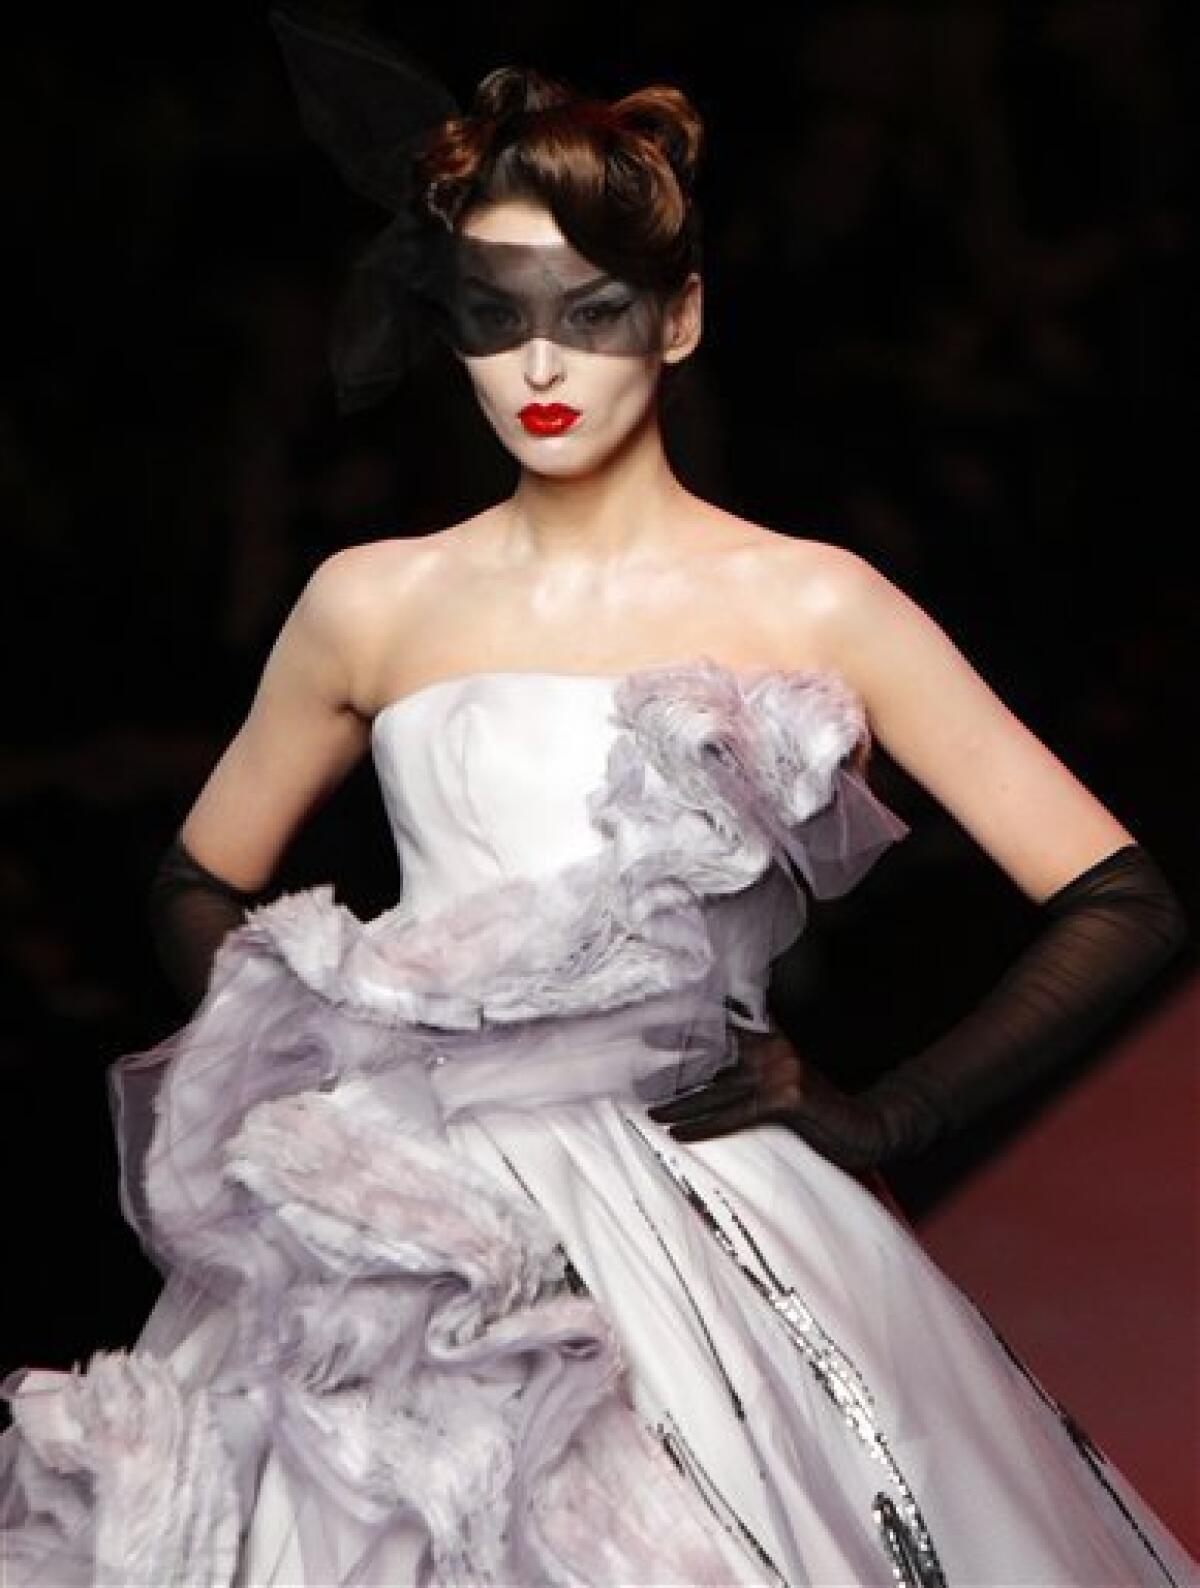 A model wears a creation by British fashion designer John Galliano for Dior's Haute Couture Spring Summer 2011 fashion collection presented in Paris, Monday, Jan. 24, 2011. (AP Photo/Francois Mori)